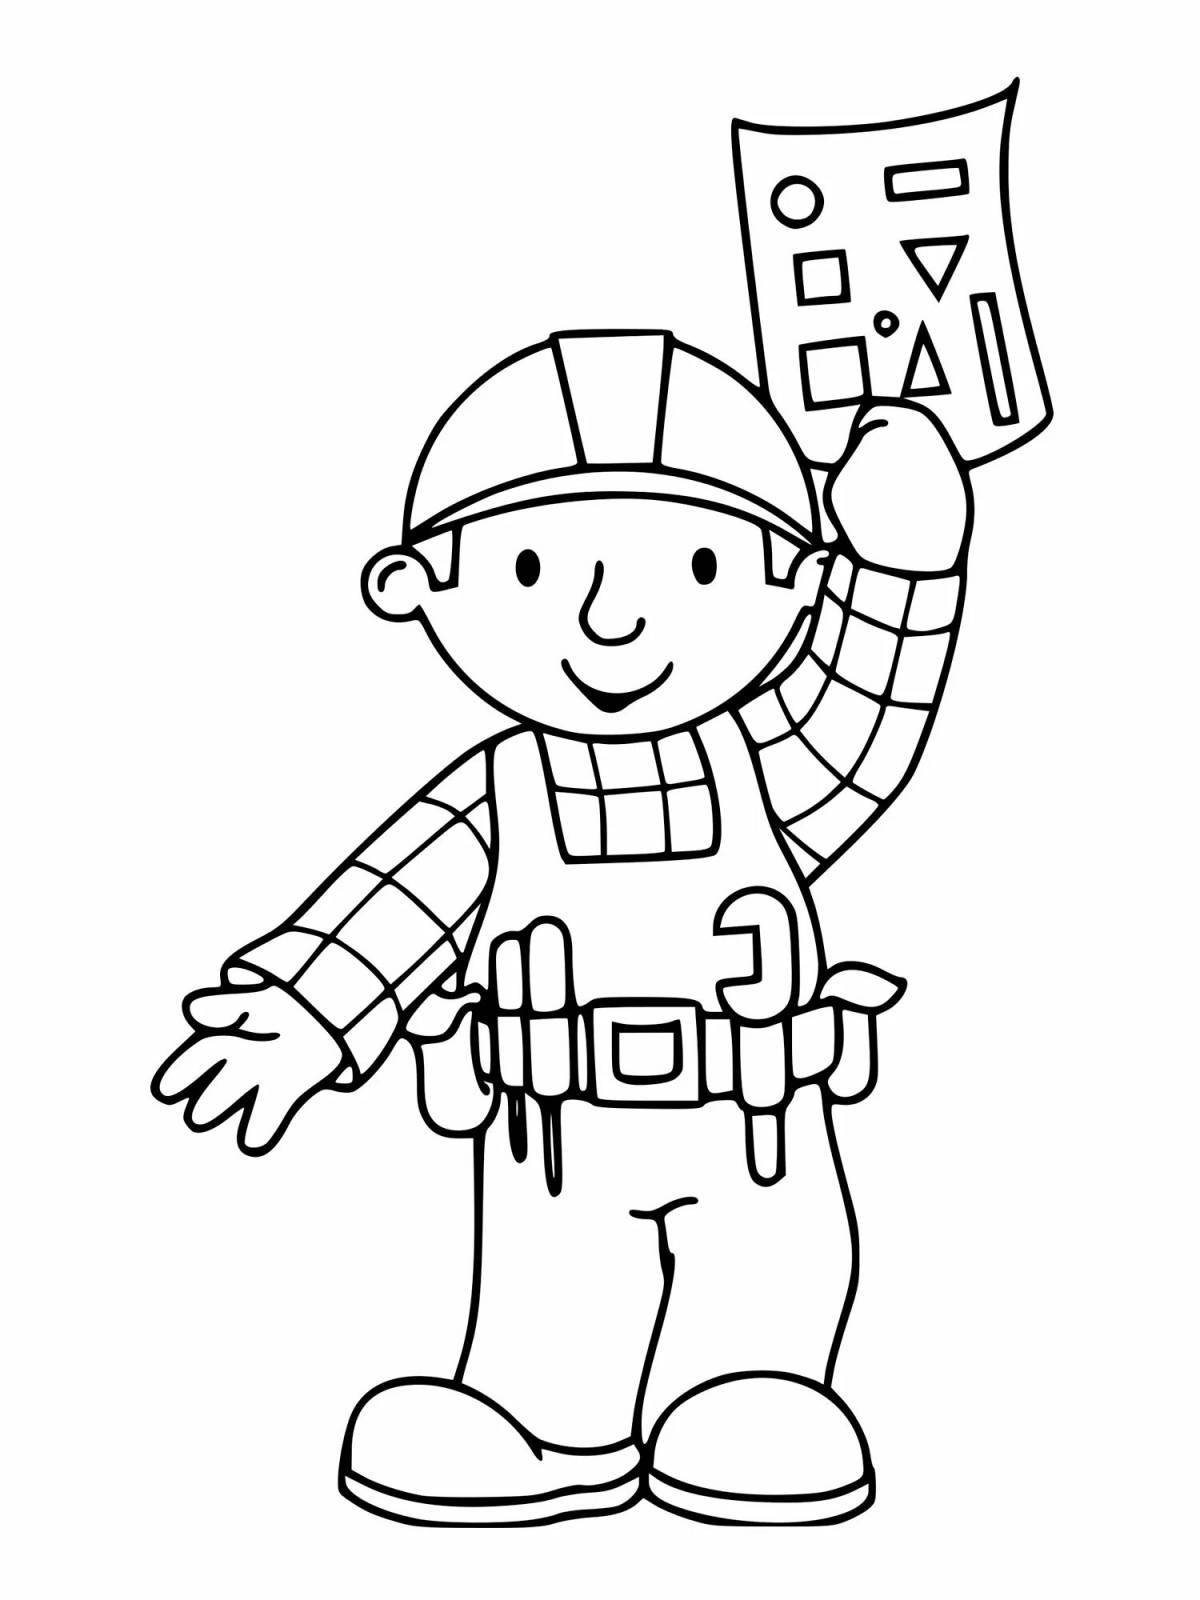 Attractive occupational safety coloring page